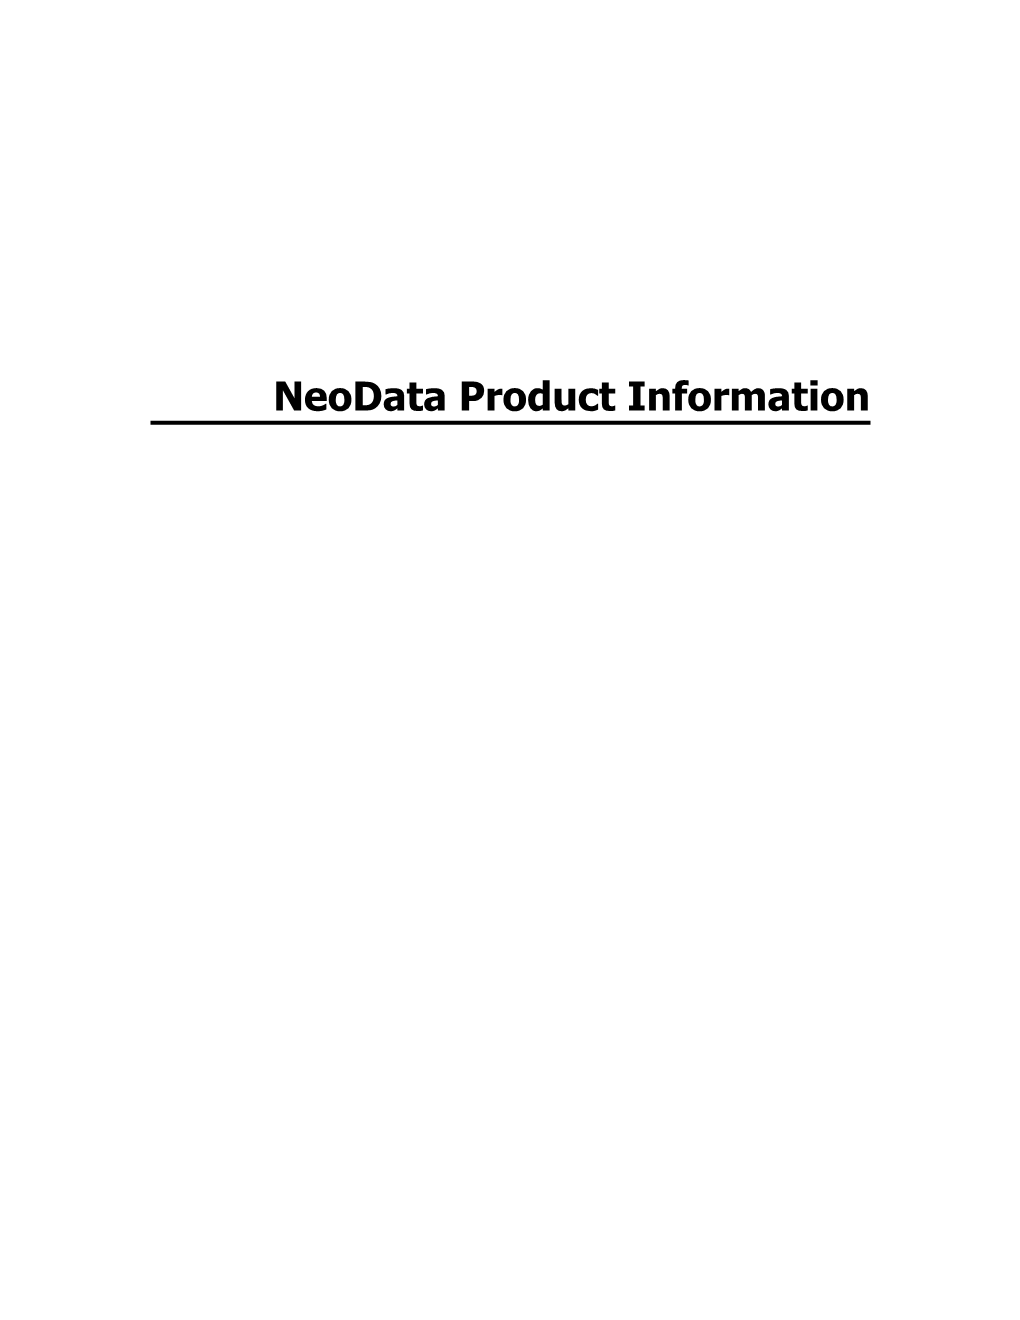 Neodata Product Information